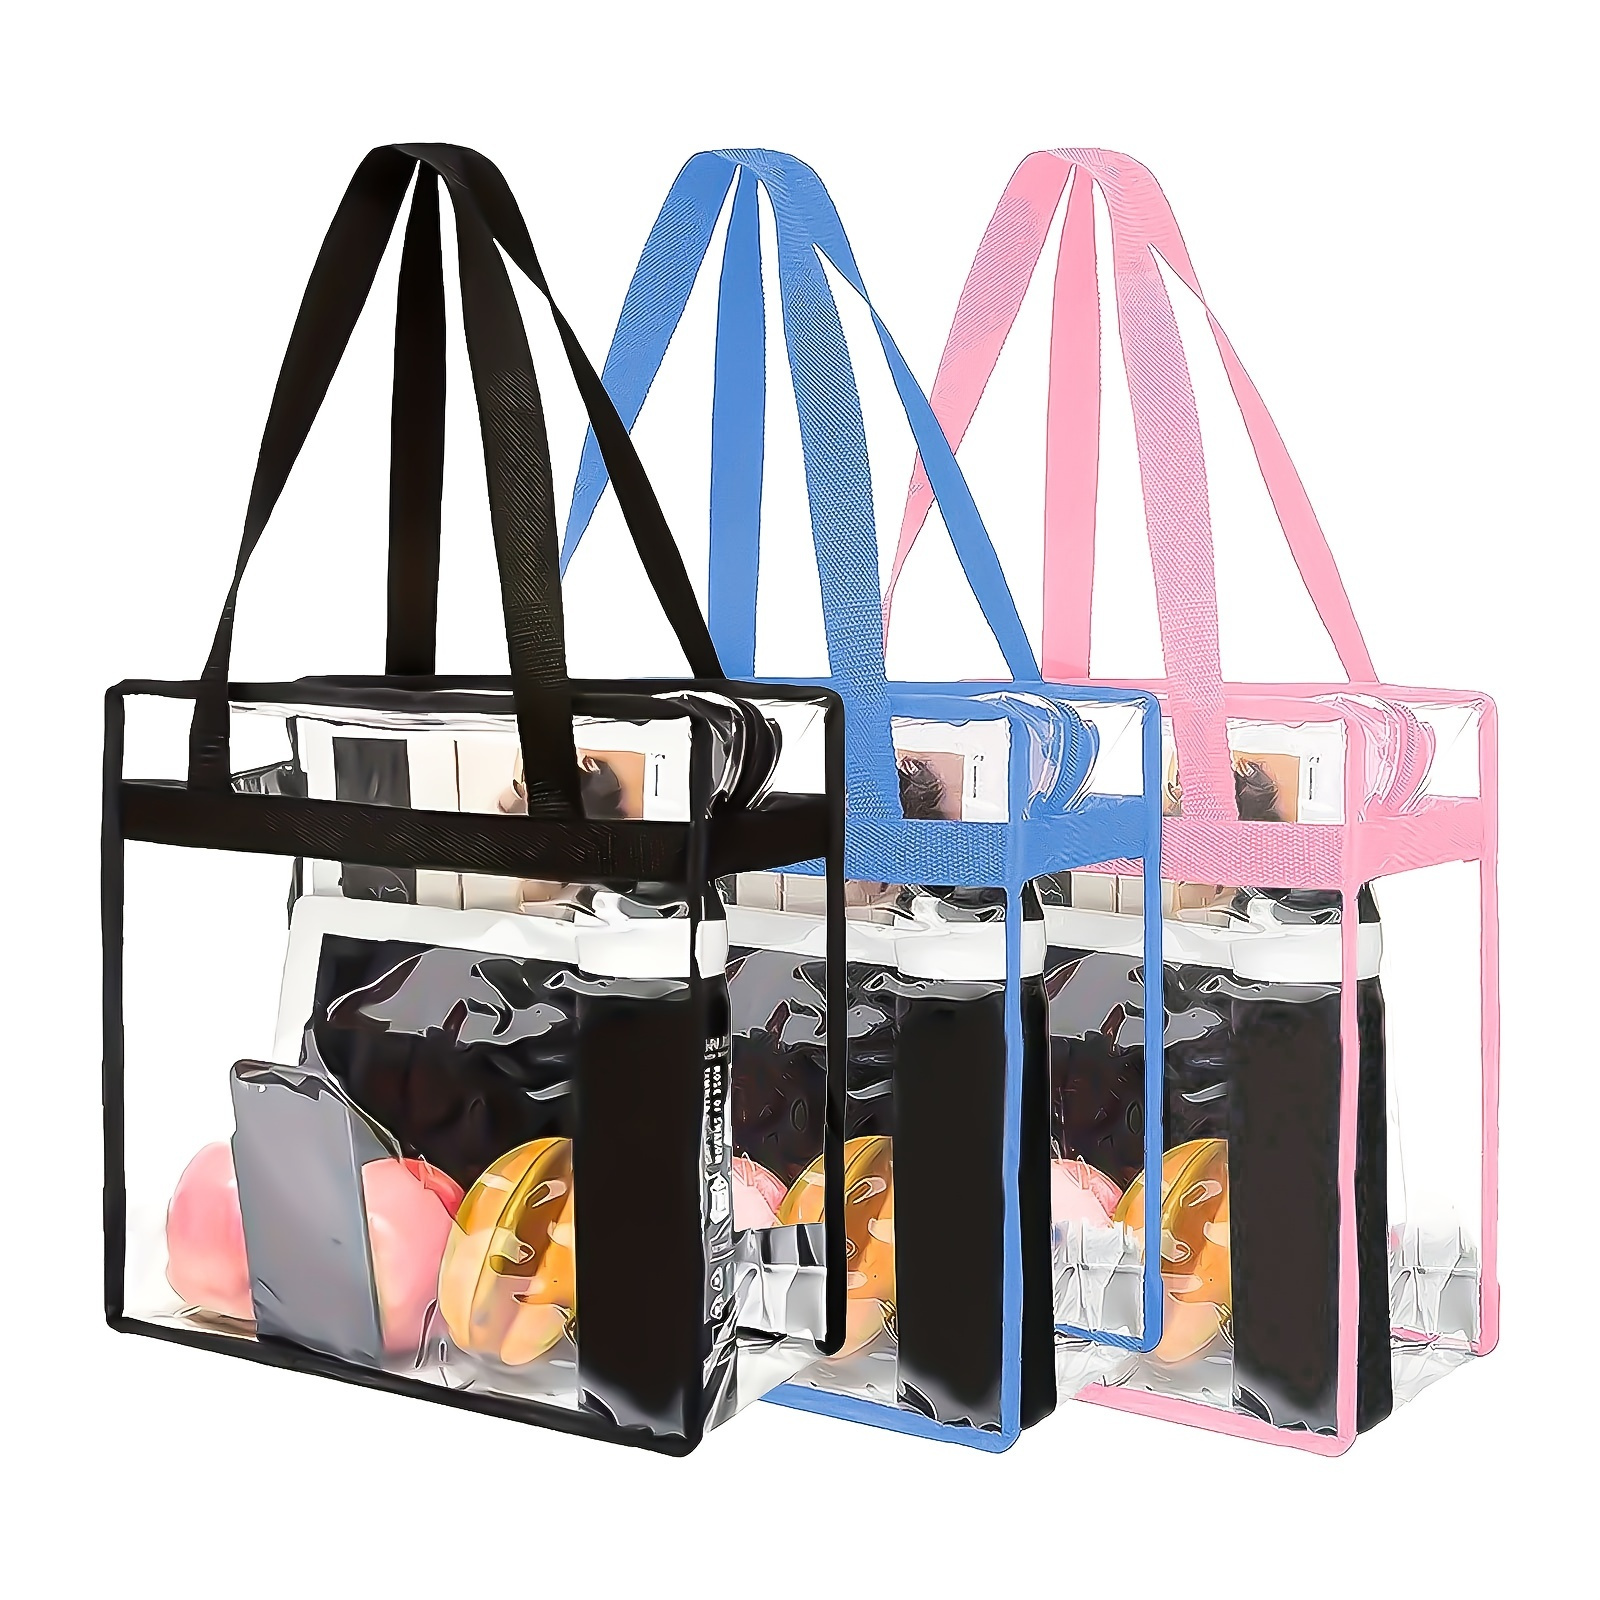 

Transparent Tote Bag With Black/pink/blue Handles, Clear Pvc Shoulder Bag, Zippered Closure, Simple Style Handbag For Work, Travel & Daily Use